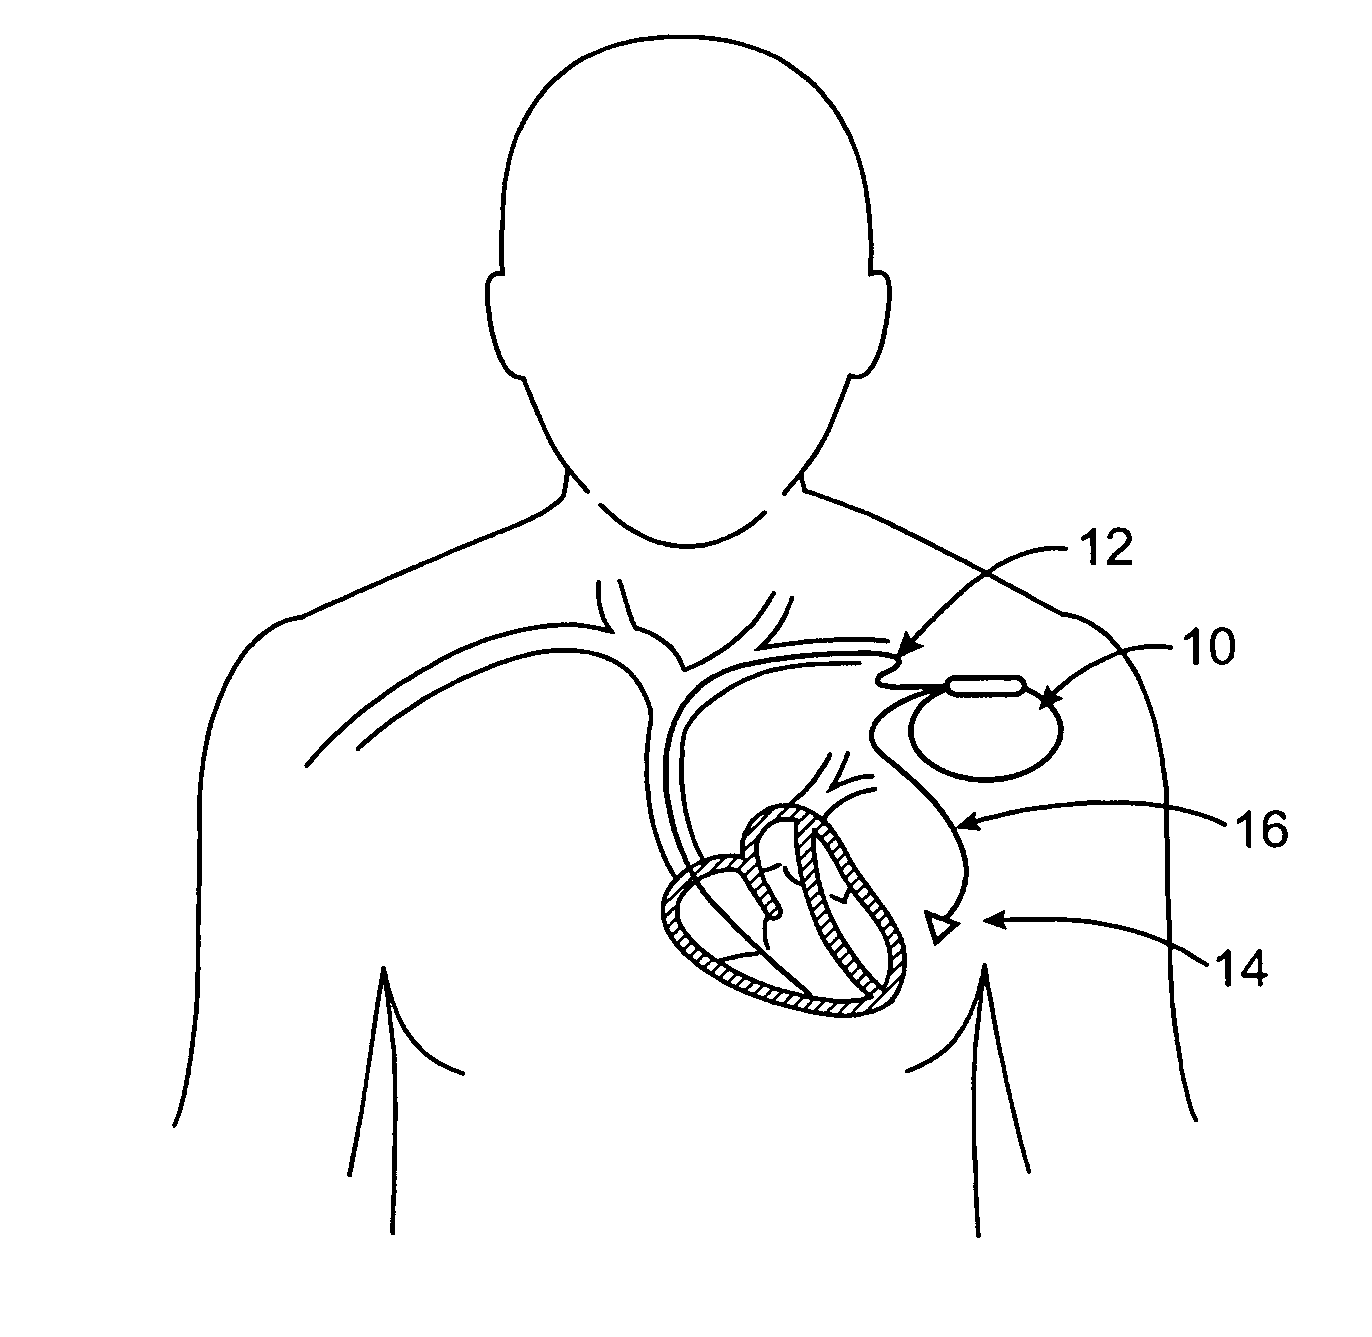 Vibrational therapy device used for resynchronization pacing in a treatment for heart failure